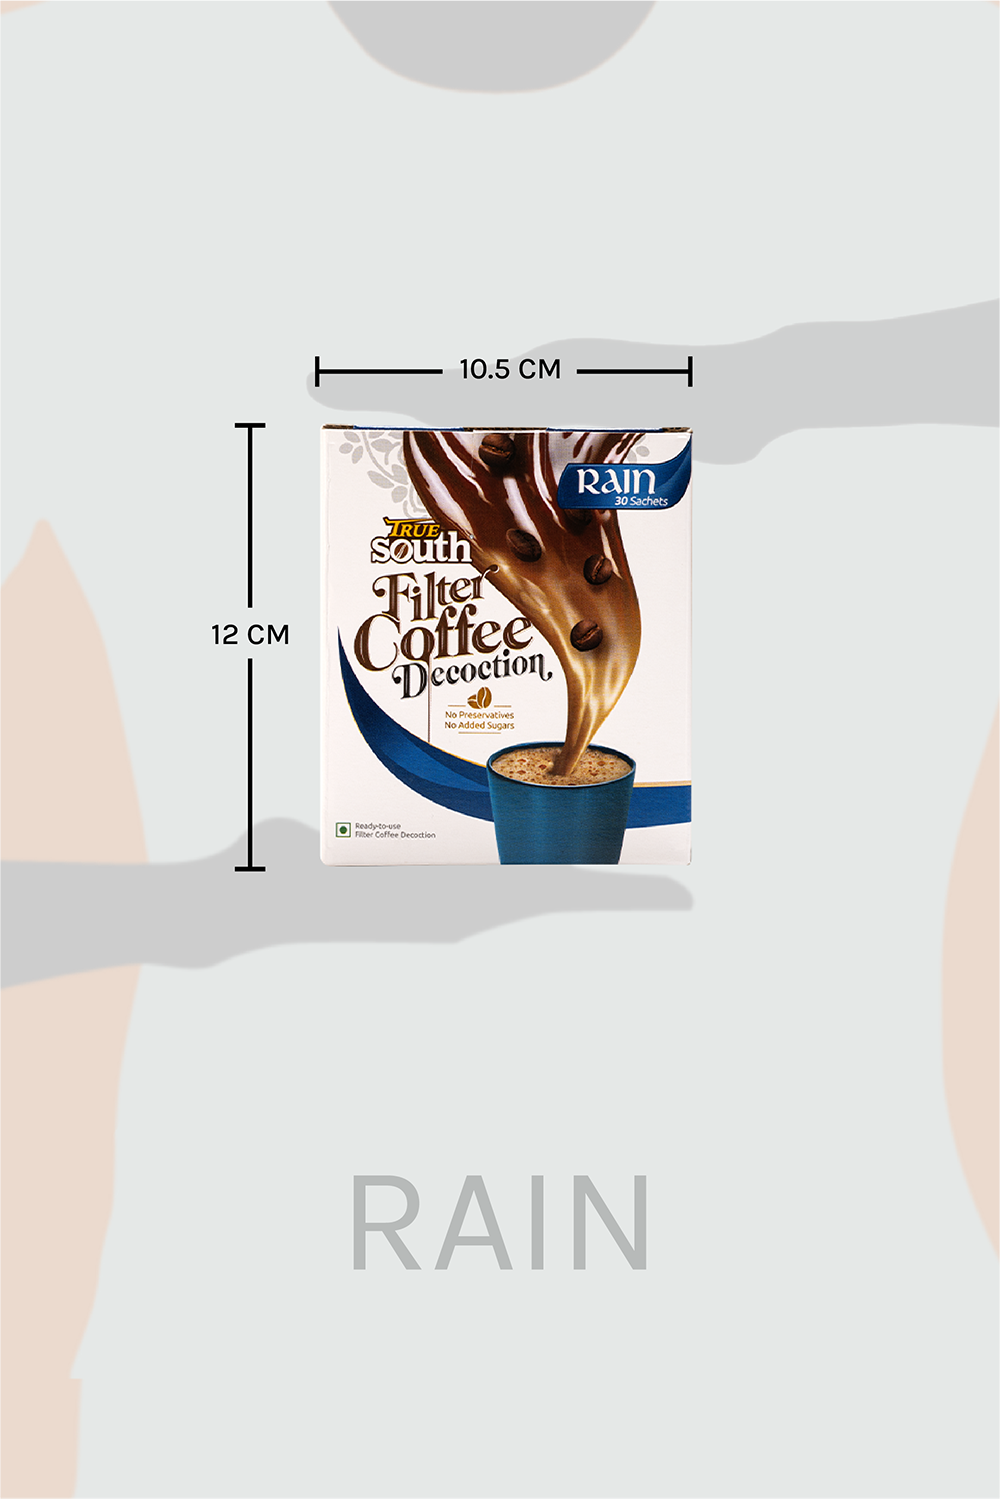 RAIN Ready-to-use Filter Coffee Decoction Subscription